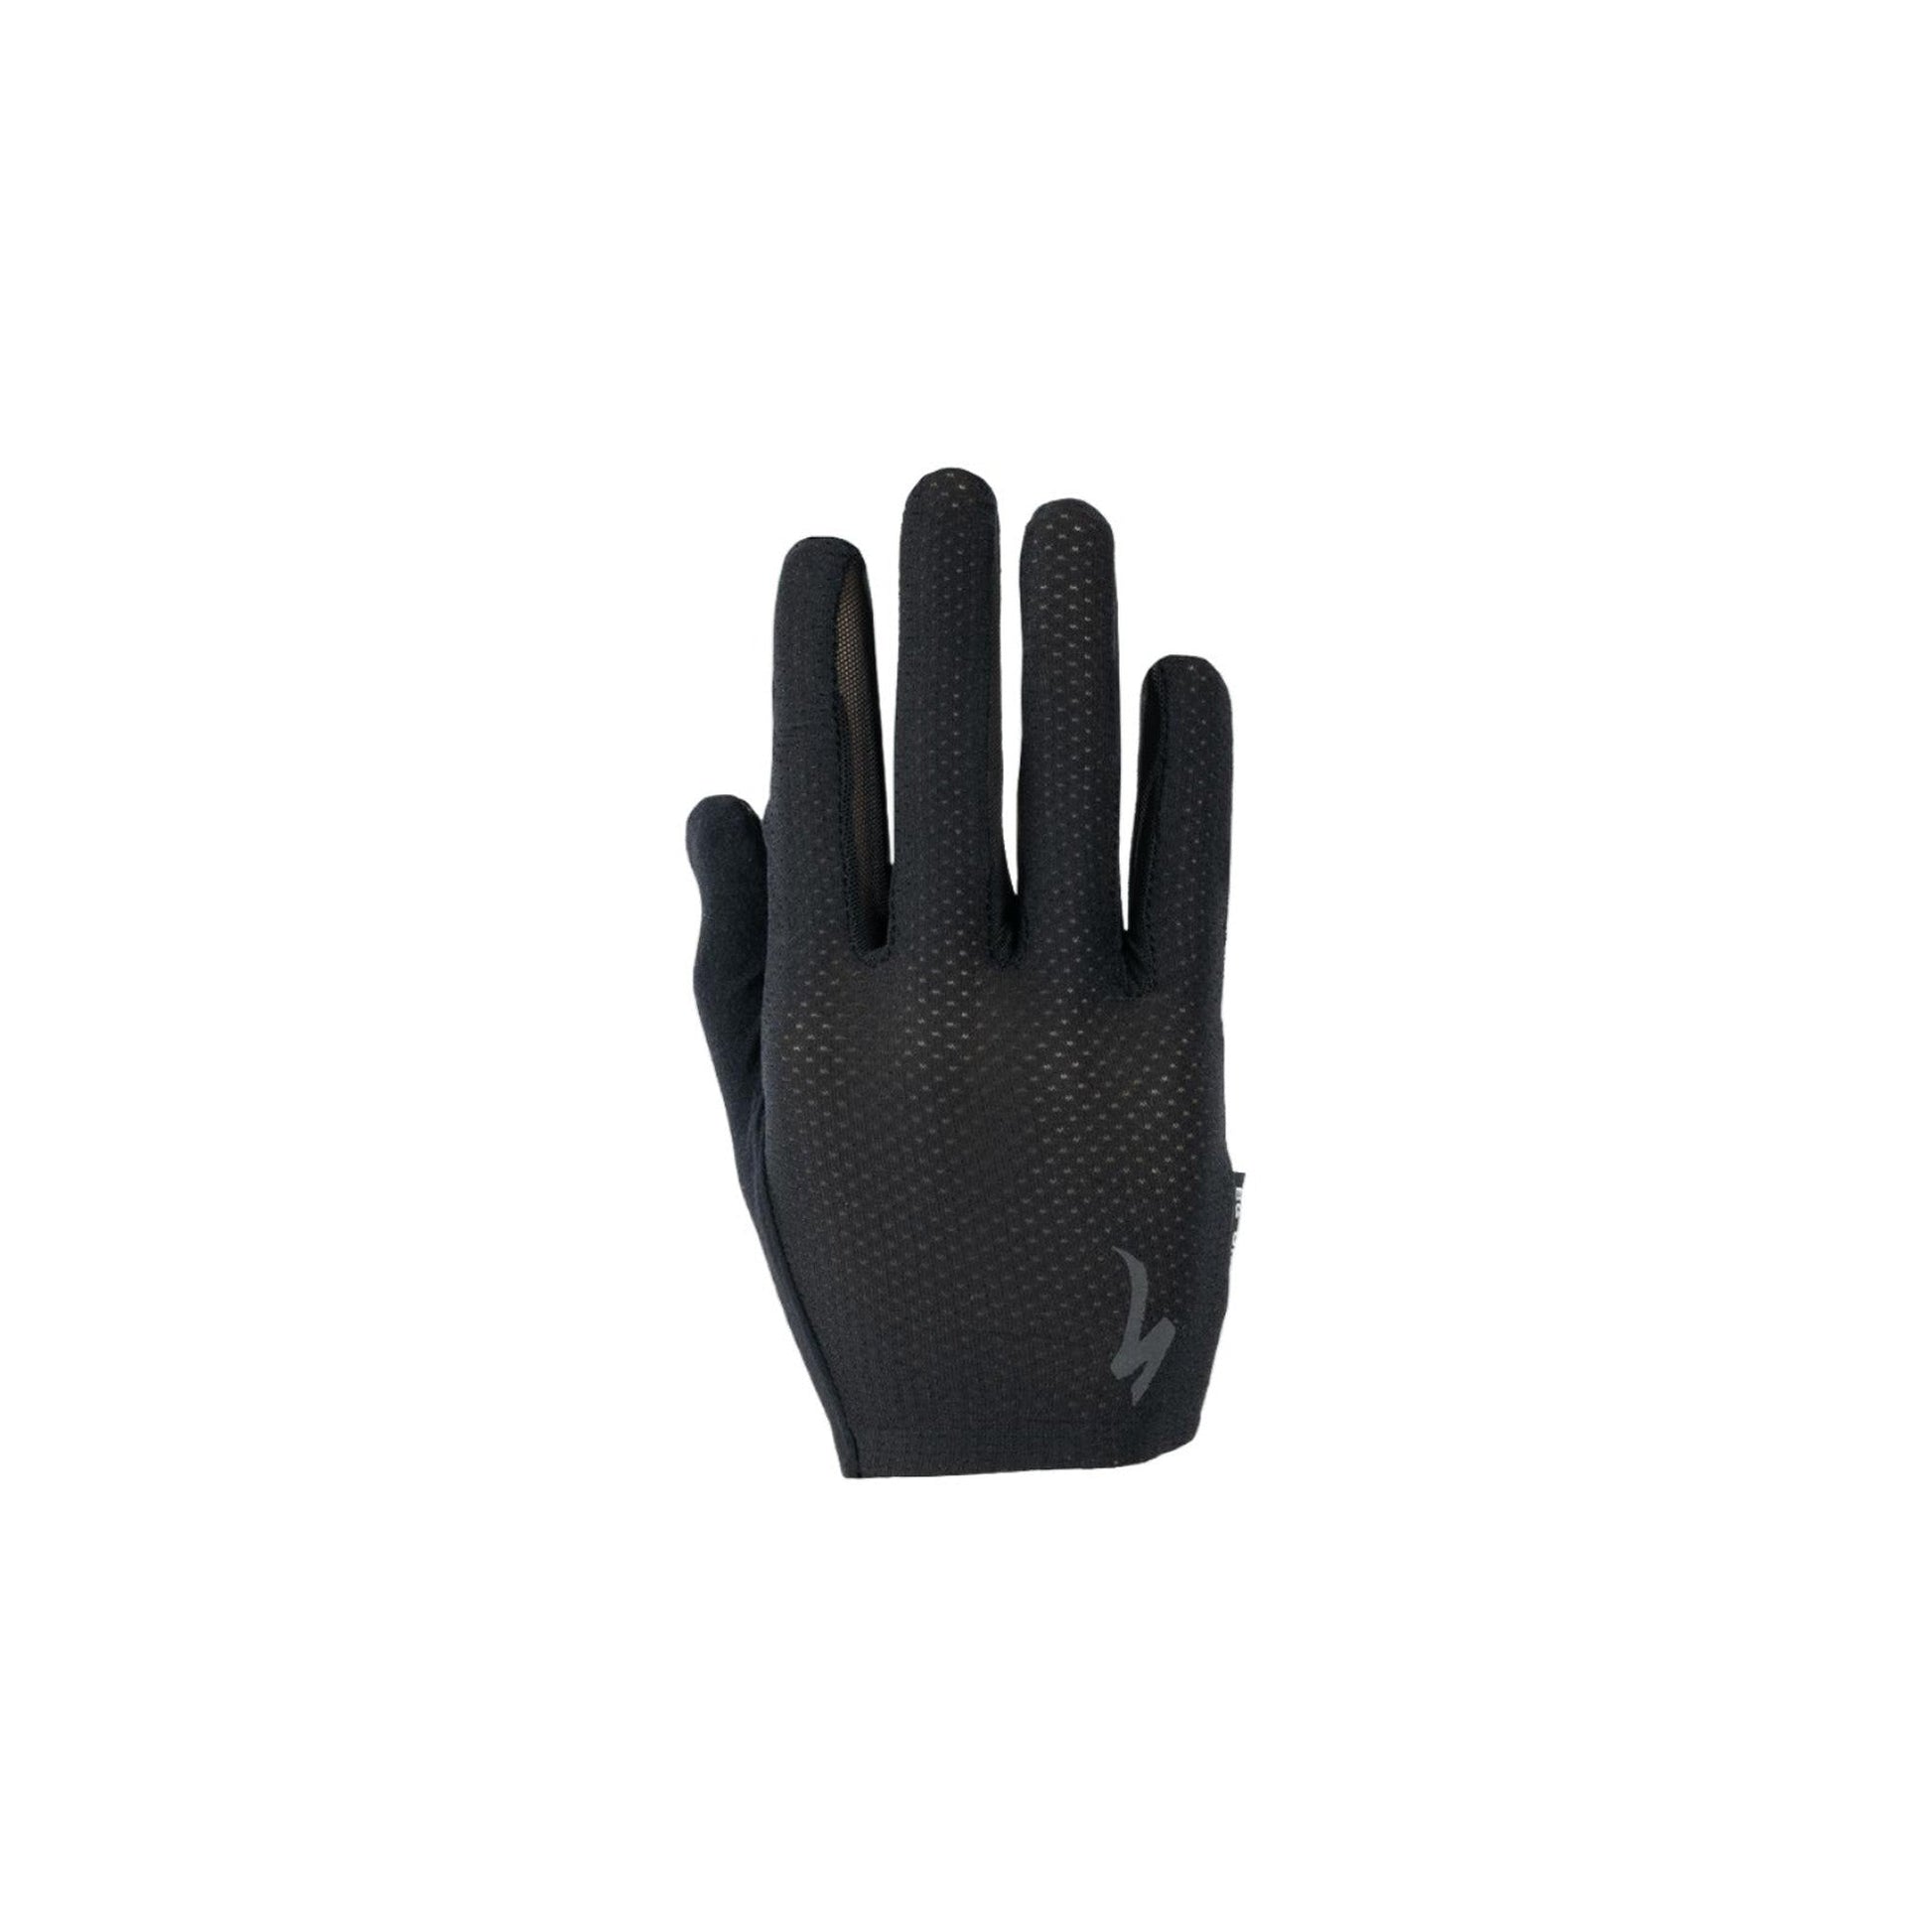 Body Geometry Grail Long Finger Gloves | Complete Cyclist - Featuring a proprietary pad system designed by Dr. Kyle Bickel M.D., our Grail Long Finger gloves are ergonomically designed for the best possible fit and